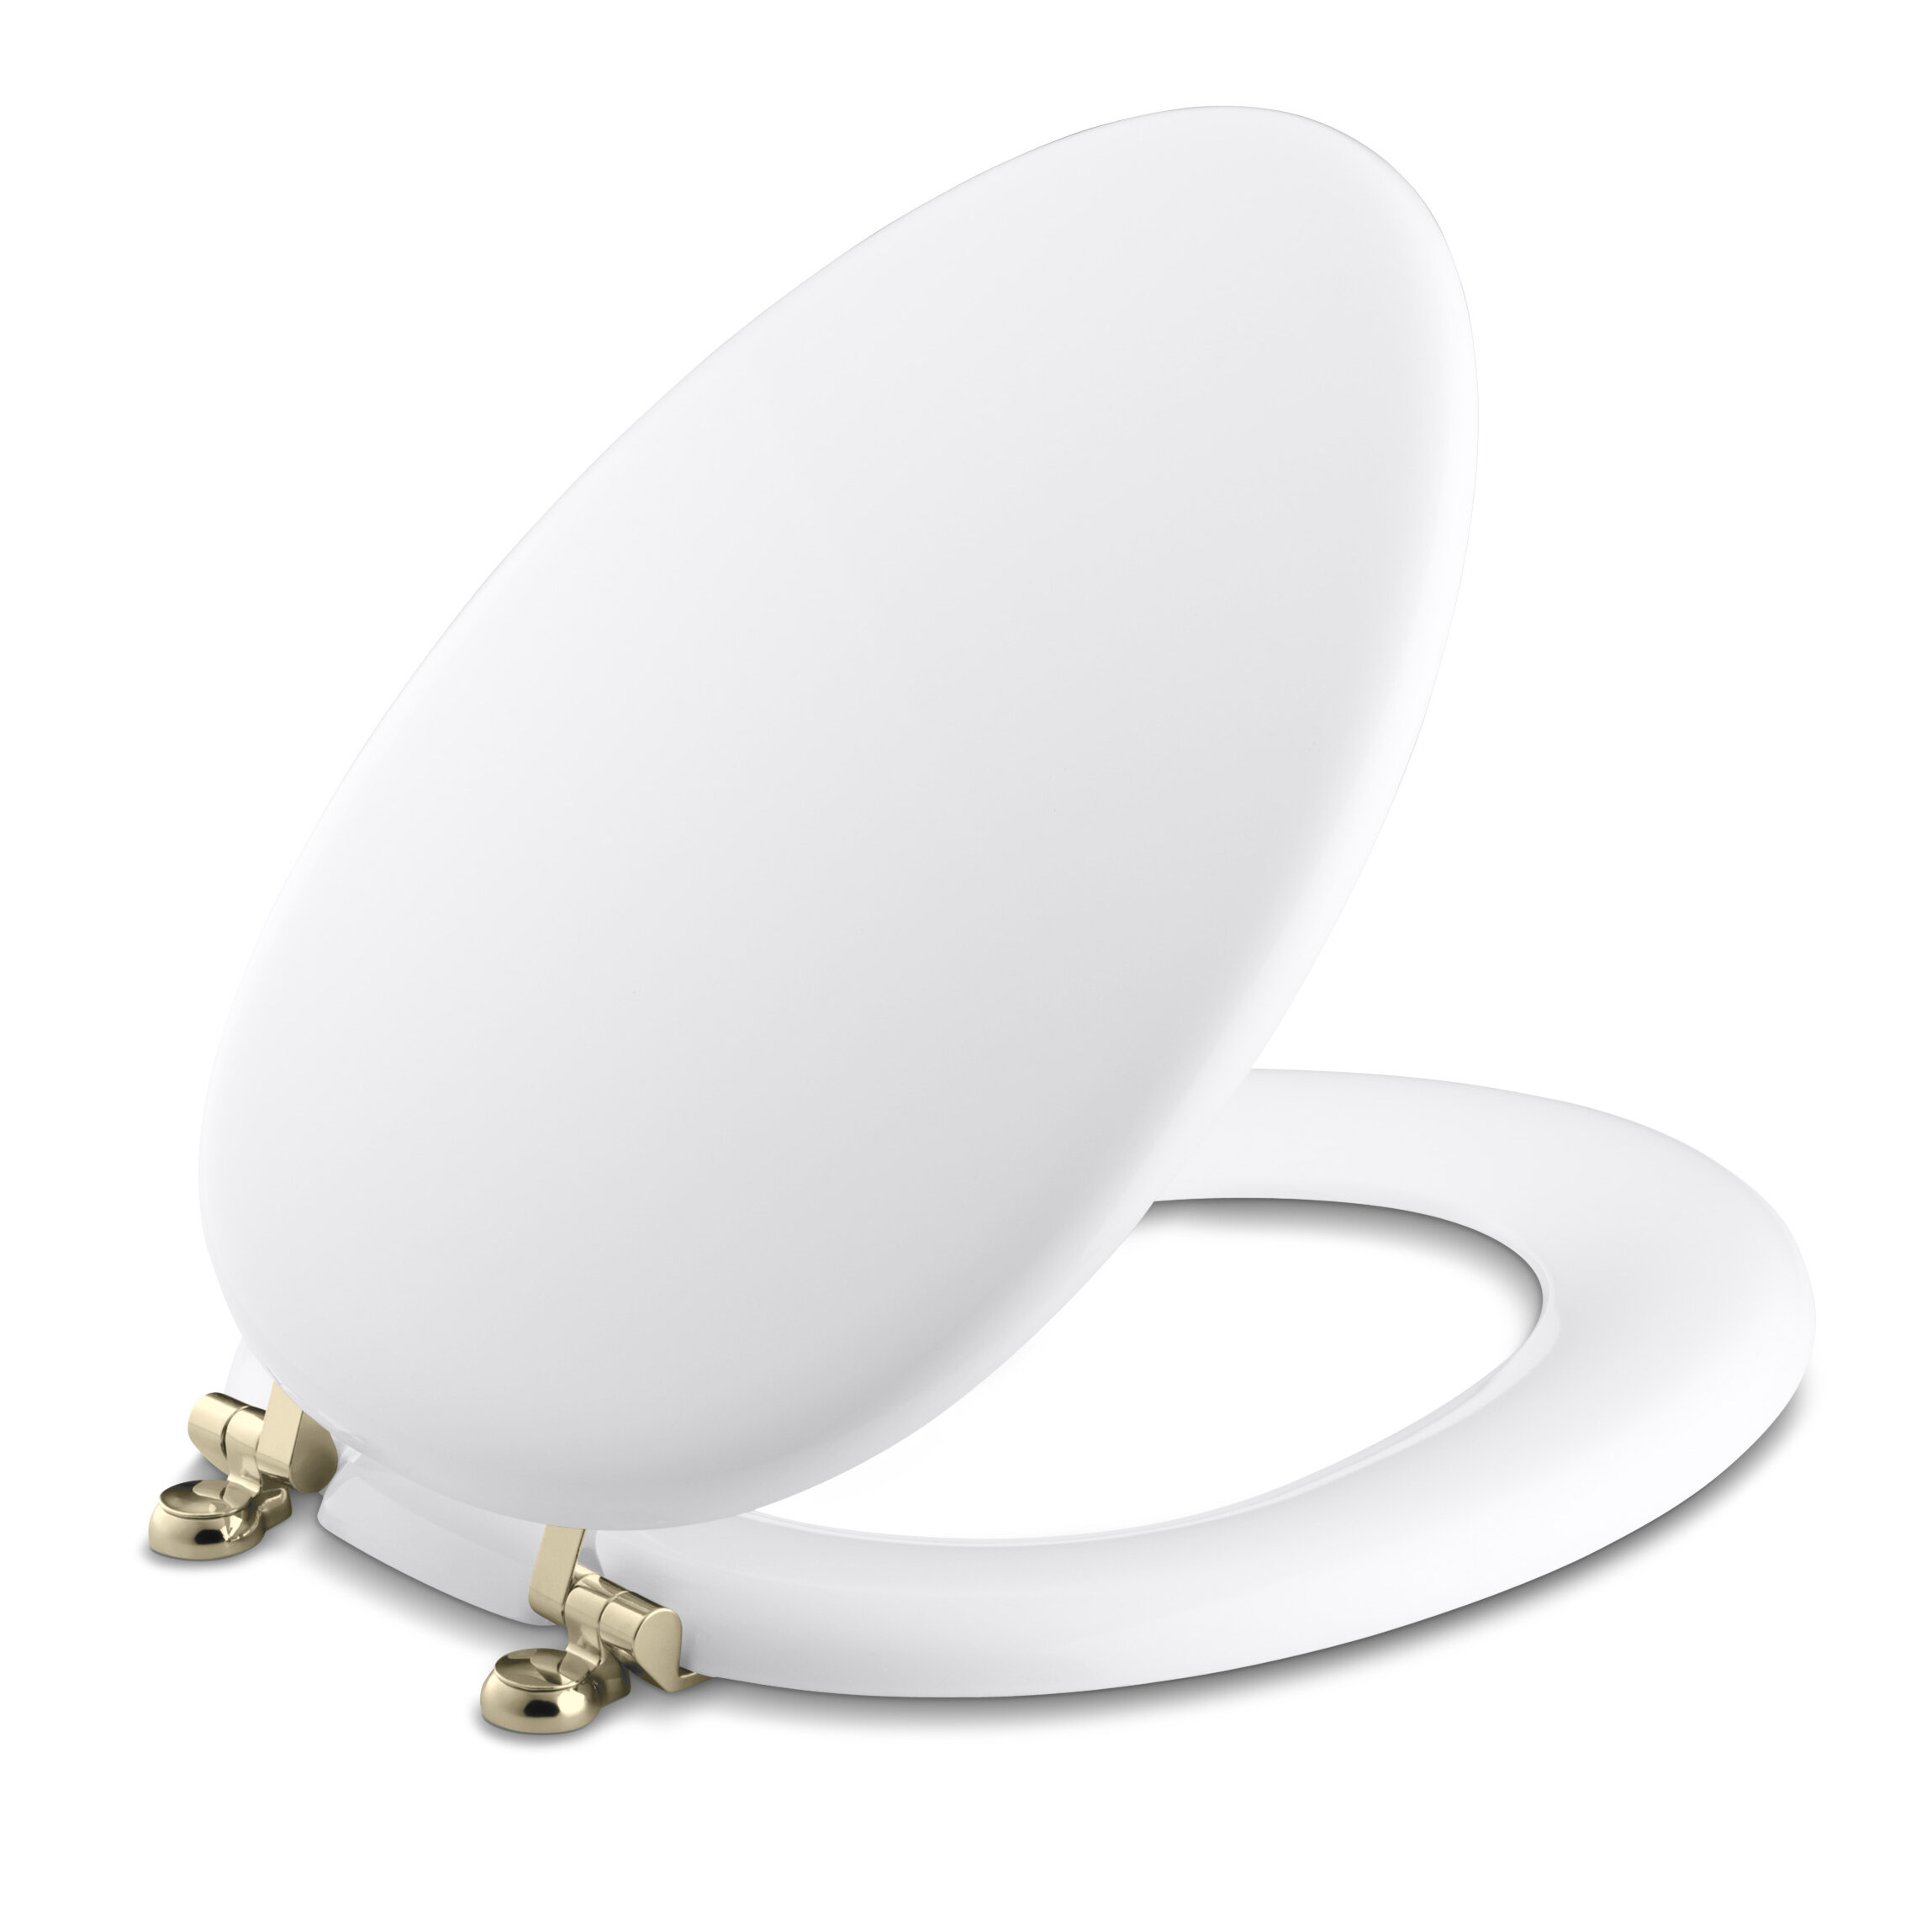 elongated padded toilet seat with metal hinges